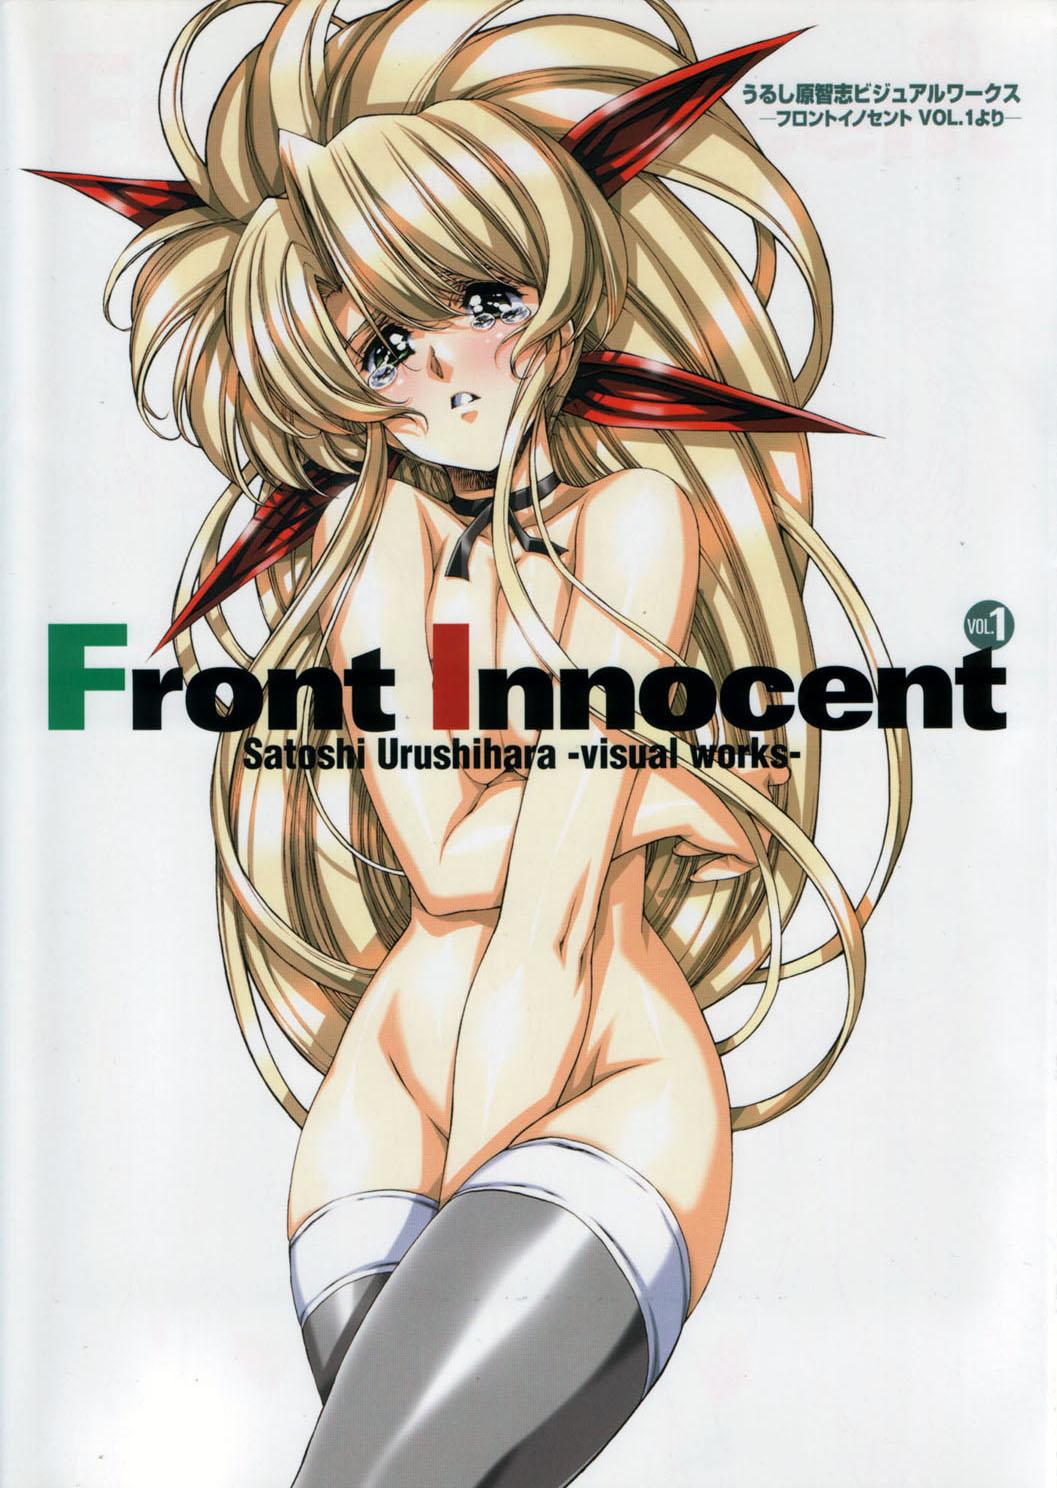 Food Front Innocent #1: Satoshi Urushihara Visual Works - Another lady innocent Punished - Page 2